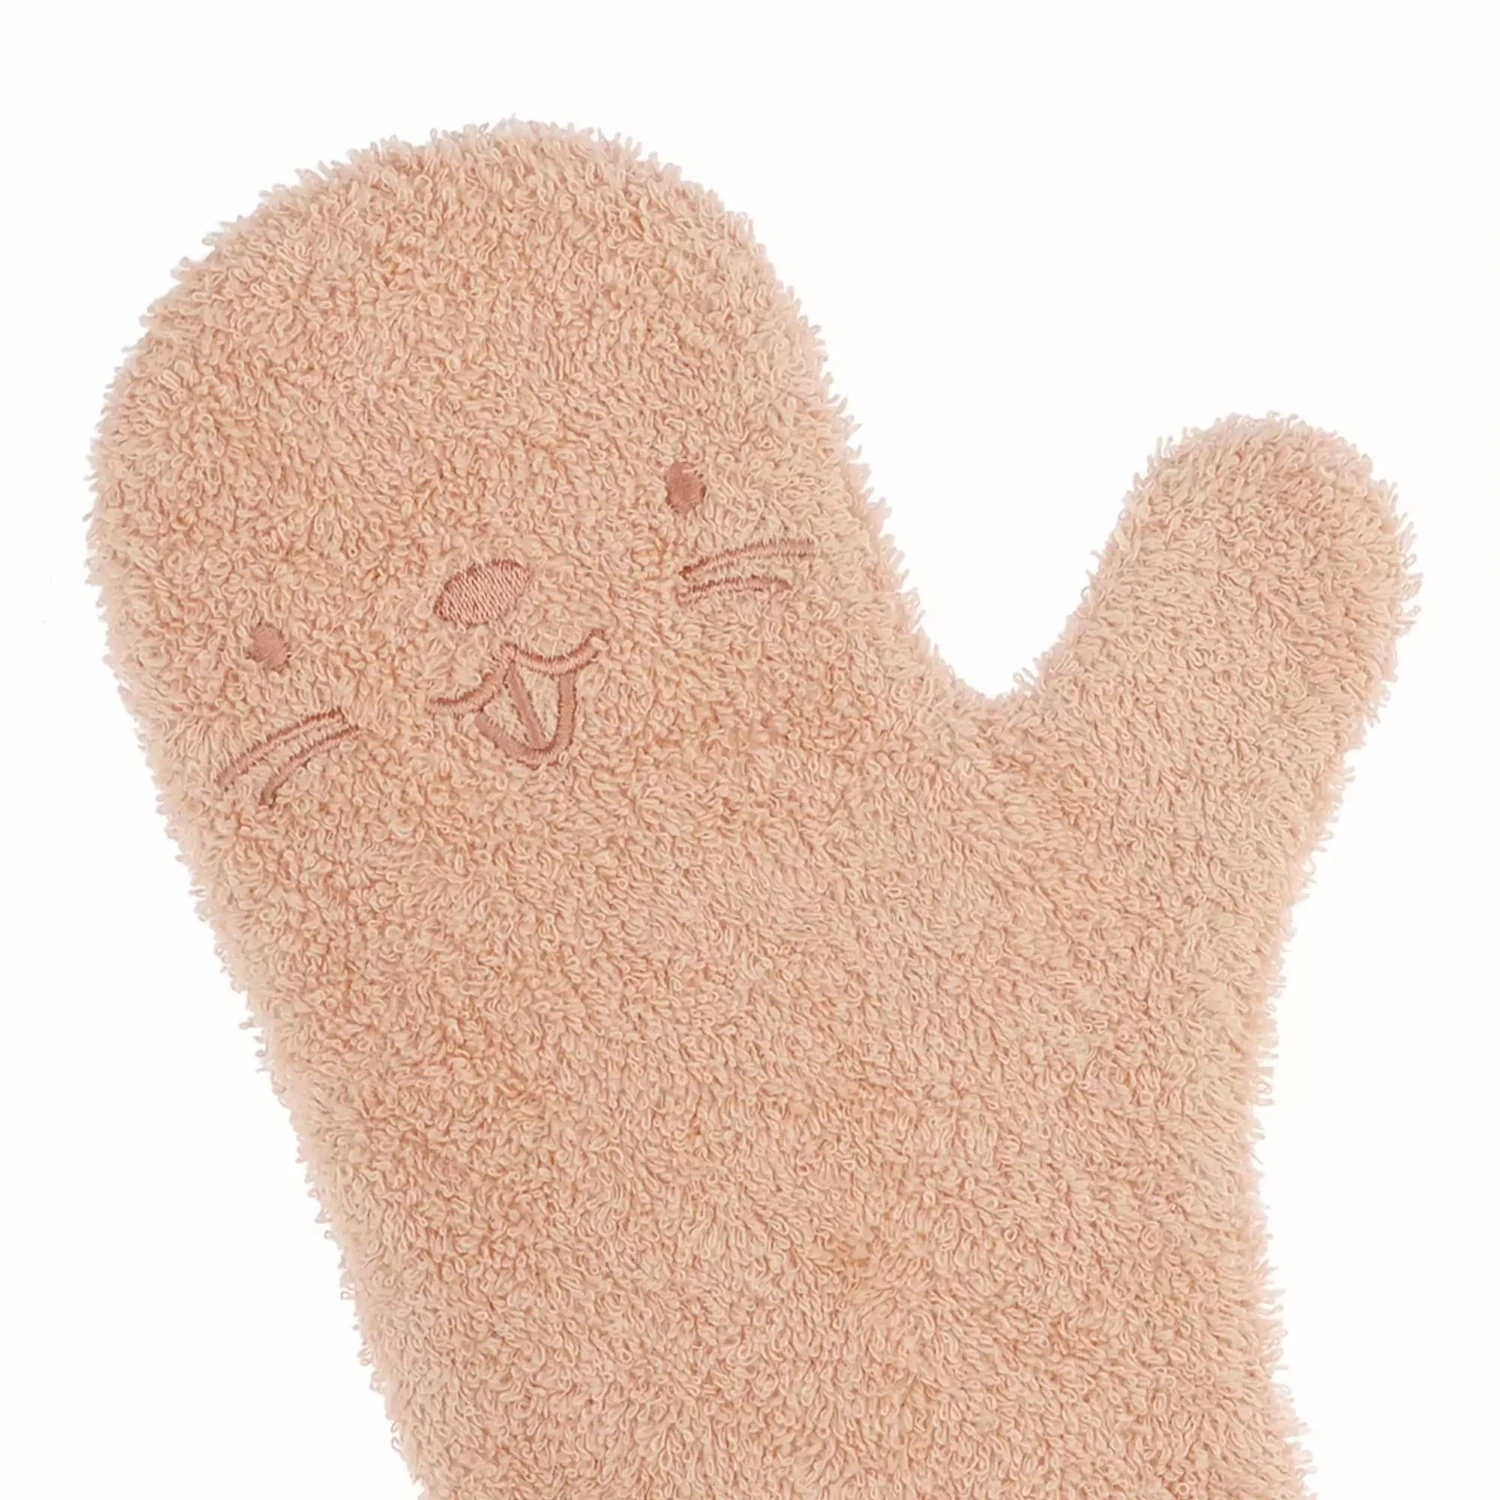 Nifty Baby Shower Glove - roze